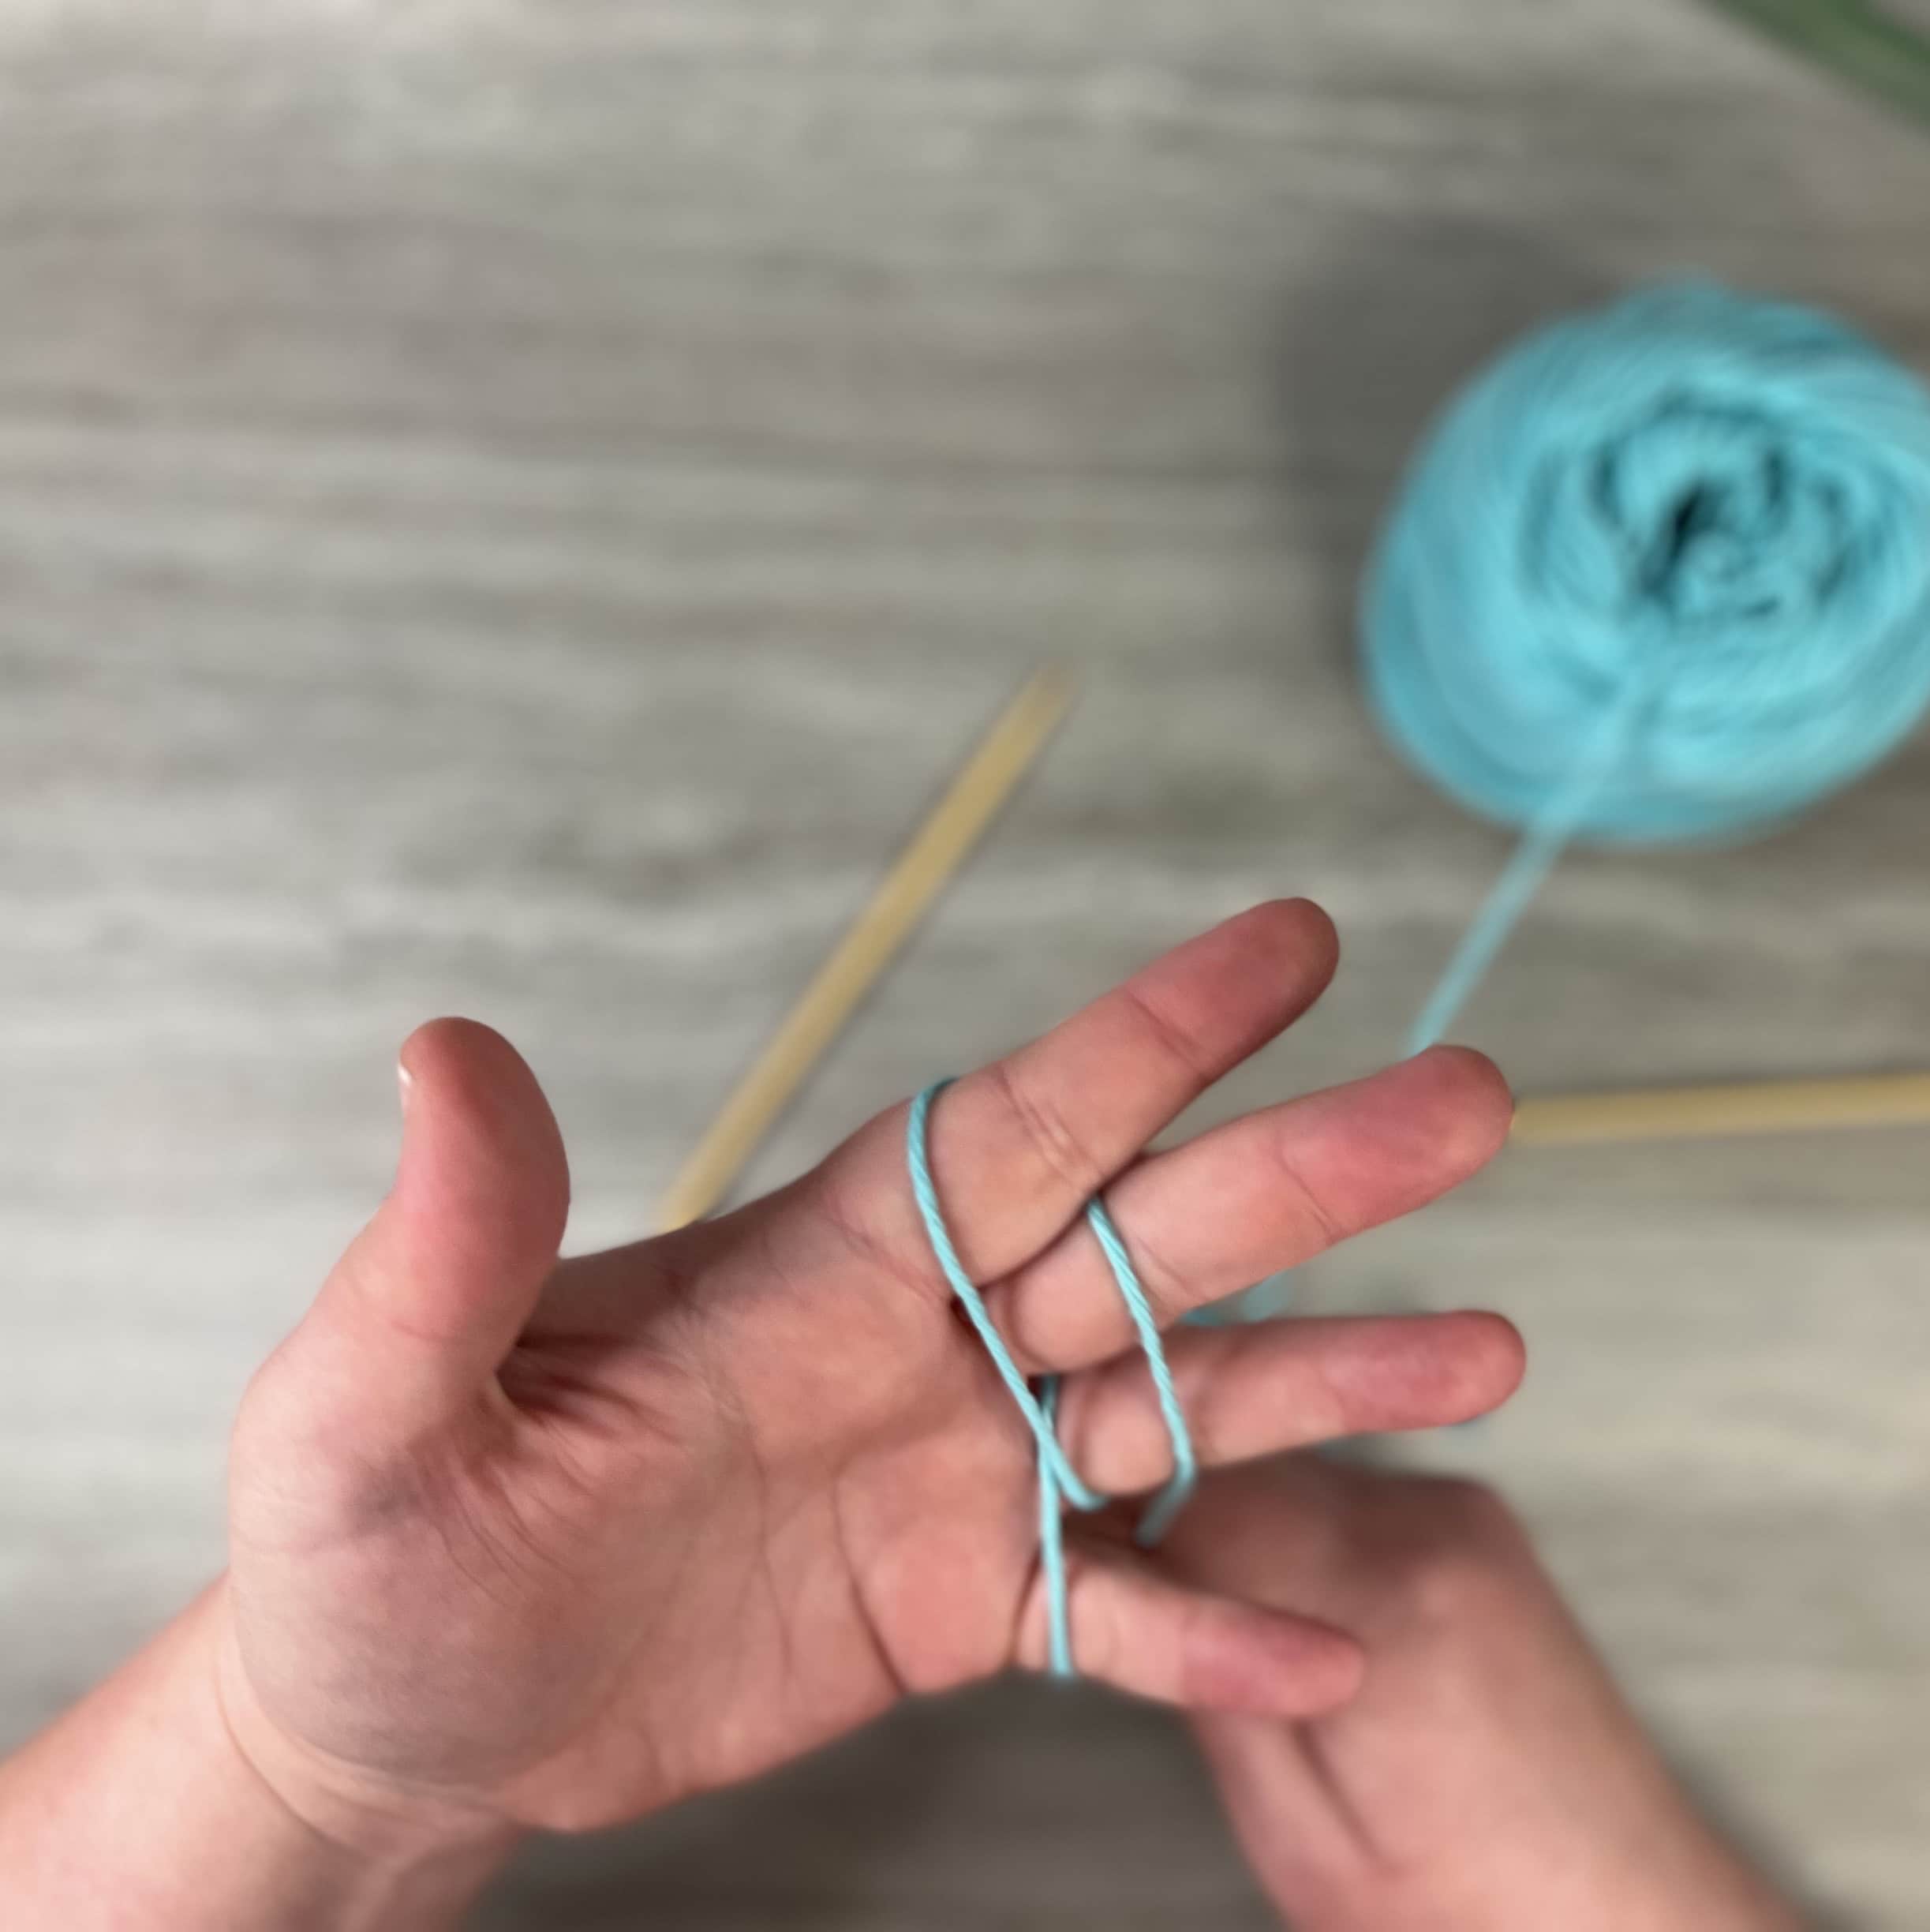 wrapping your fingers in yarn for tension taming is not a great skill for a beginner knitter to learn